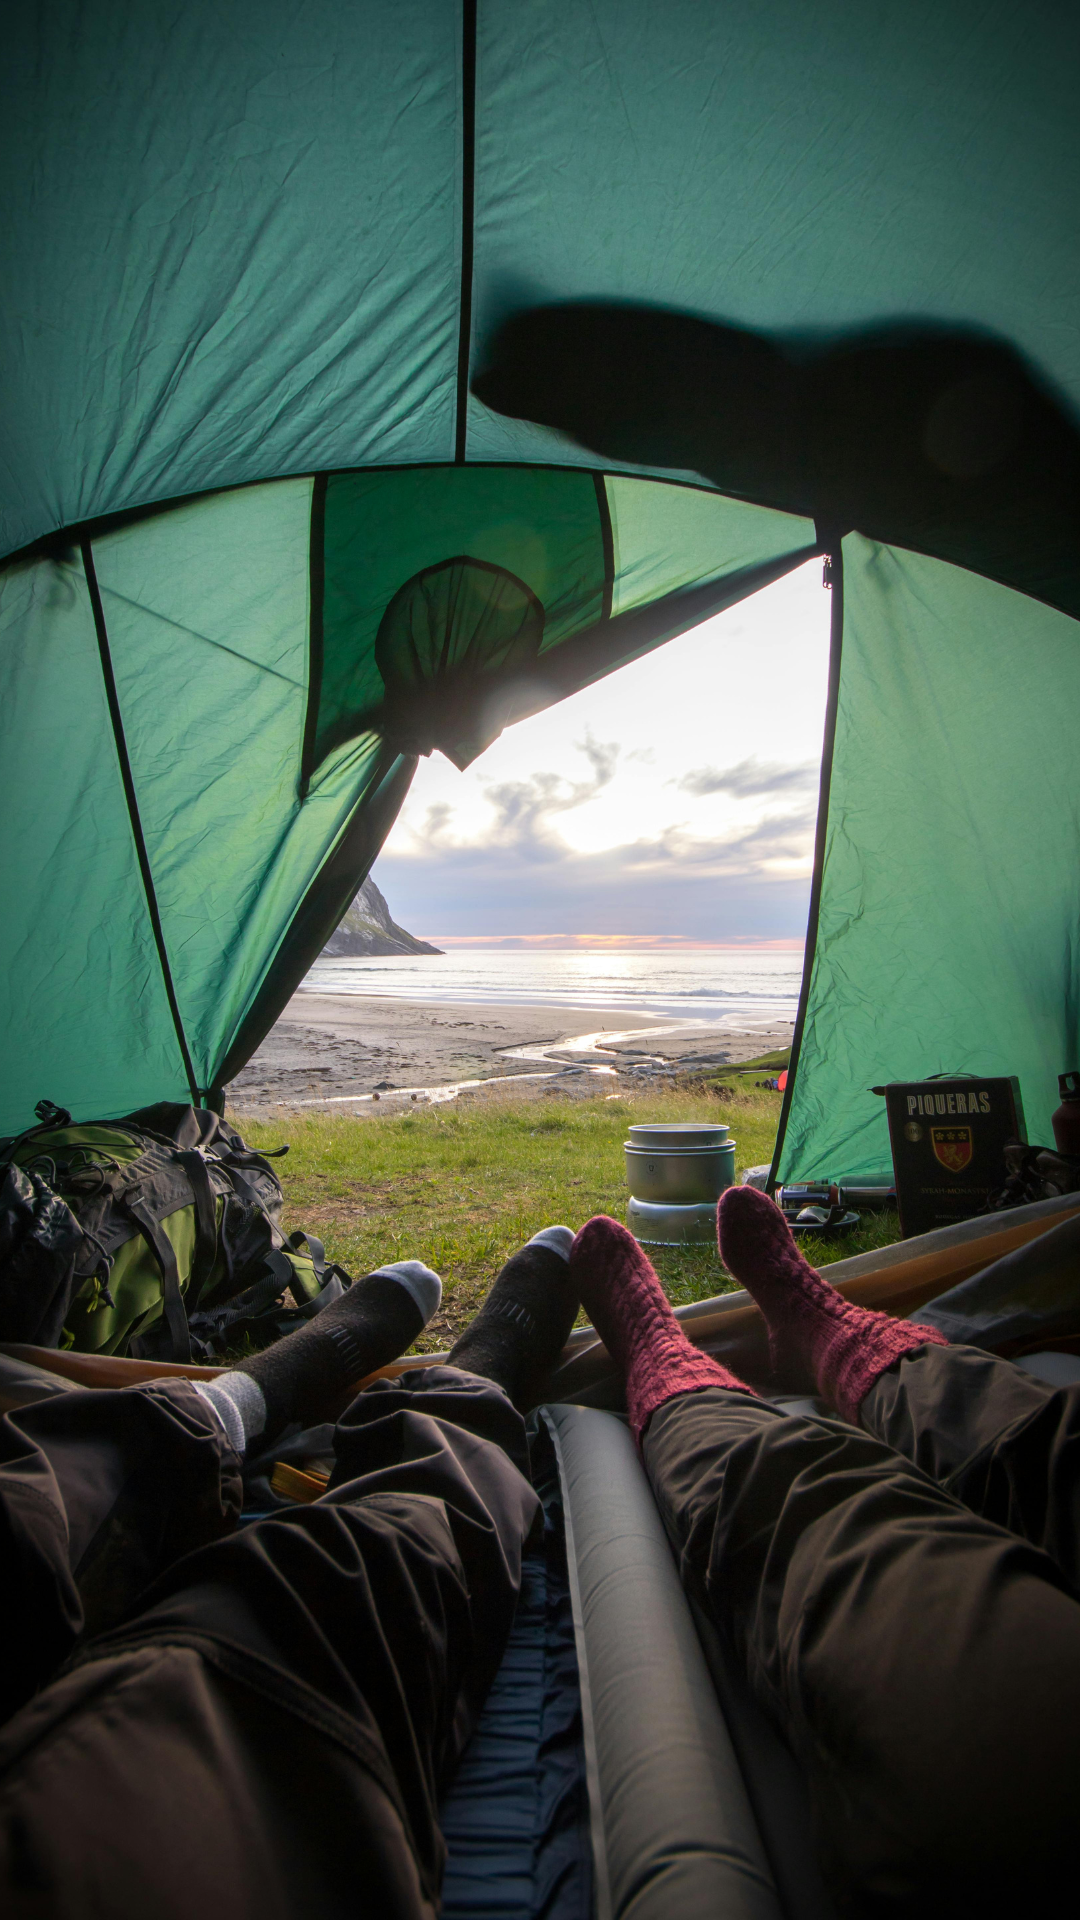 Two friends camping on the beach in a small green tent